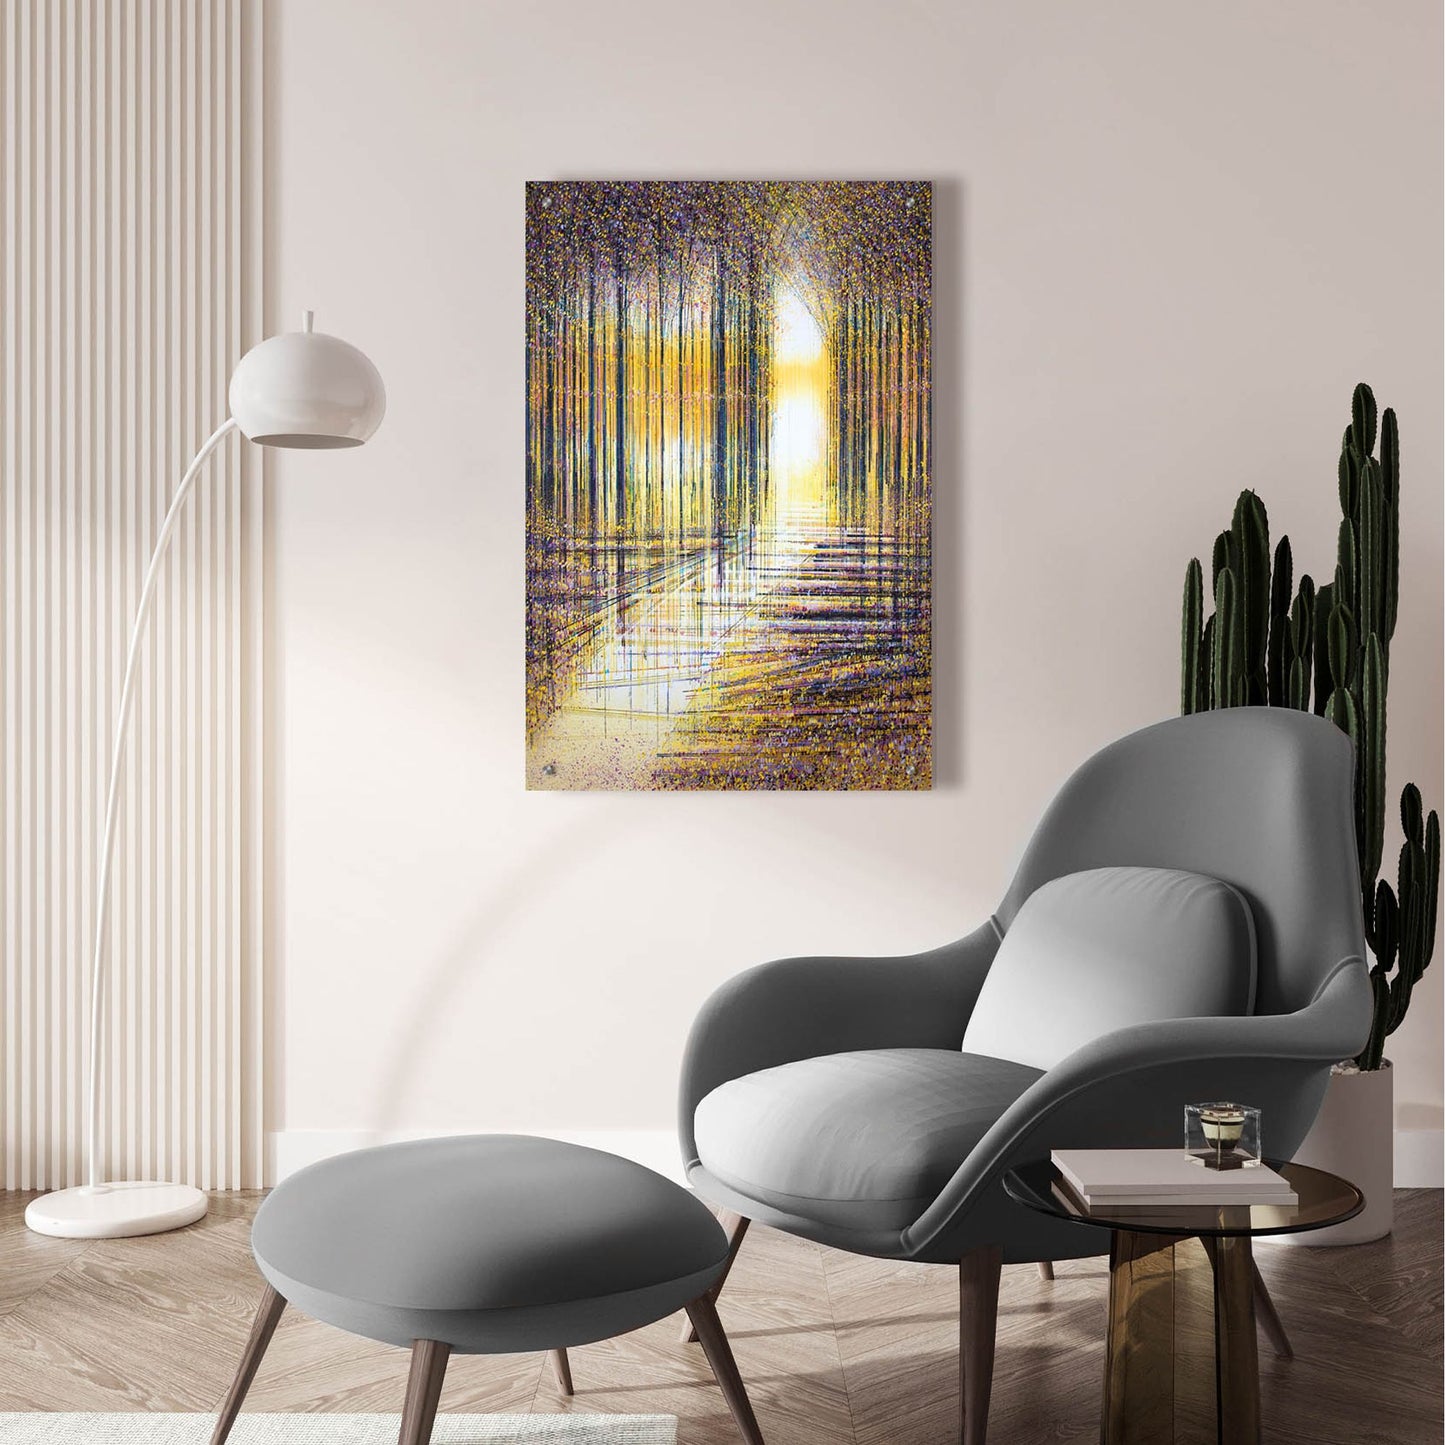 Epic Art 'Autumn Trees in Evening Light' by Marc Todd, Acrylic Glass Wall Art,24x36